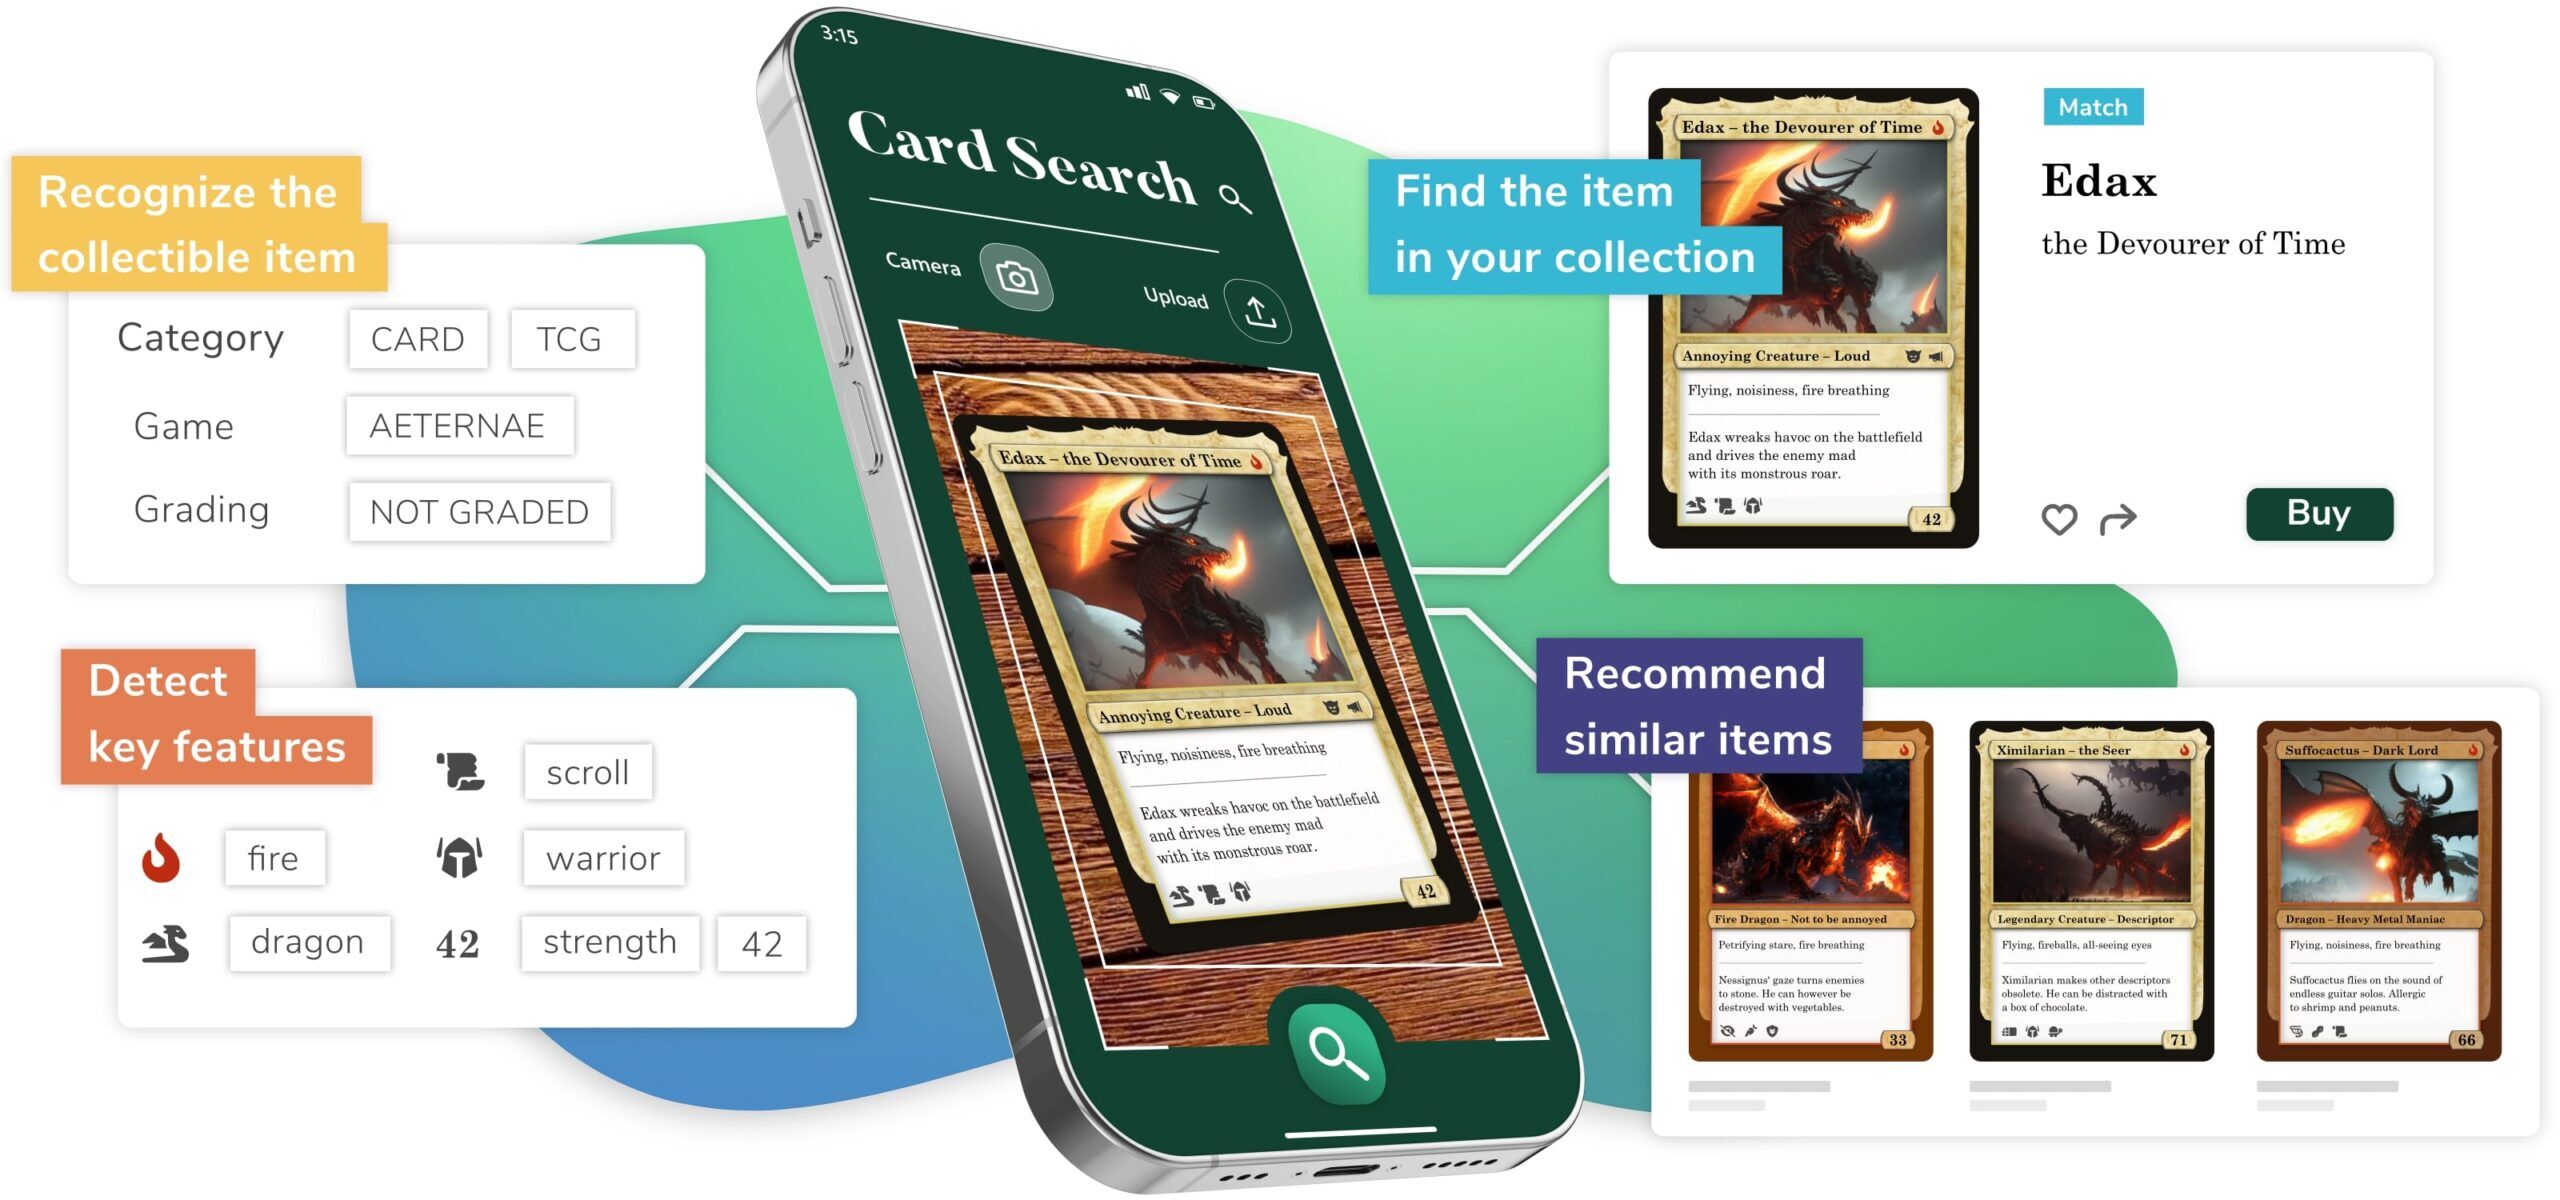 Object detection, attribute recognition and visual search of collectible trading card